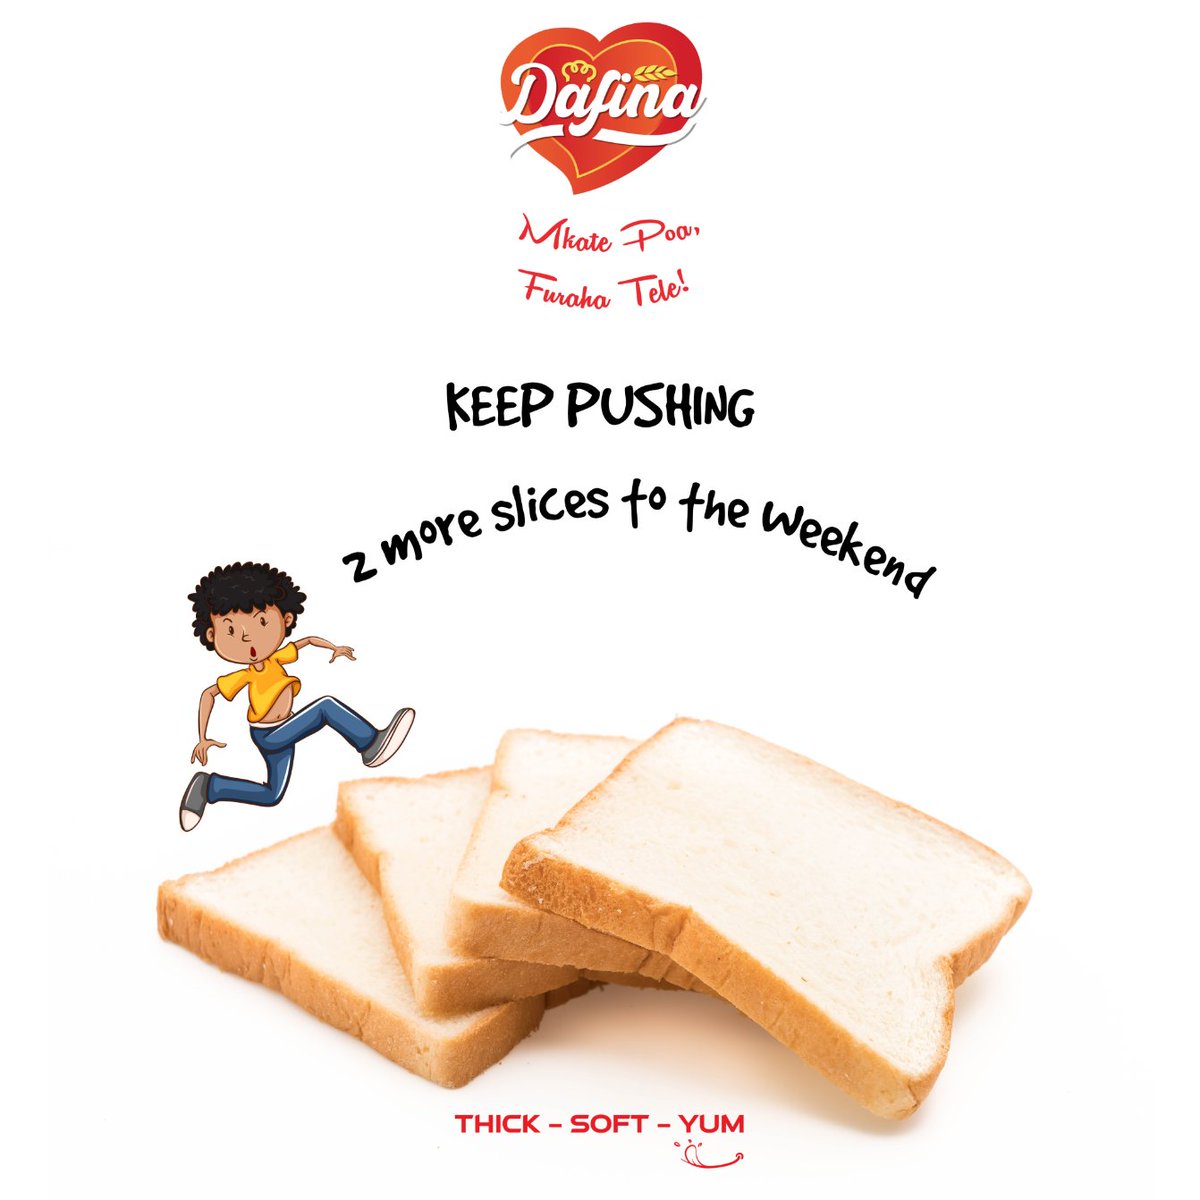 Happy Fri... Wait, it's a Tuesday.

Carry on.

There is bread, and then there is Dafina.

Just a call 0718111333, and that's all.

#TeamDafina #dafinabread #healthy #premium #vegan100 #proudlykenyan #lowcalories #breakfast #crustybread #keepyourcityclean #protectenvironment♻️🌎